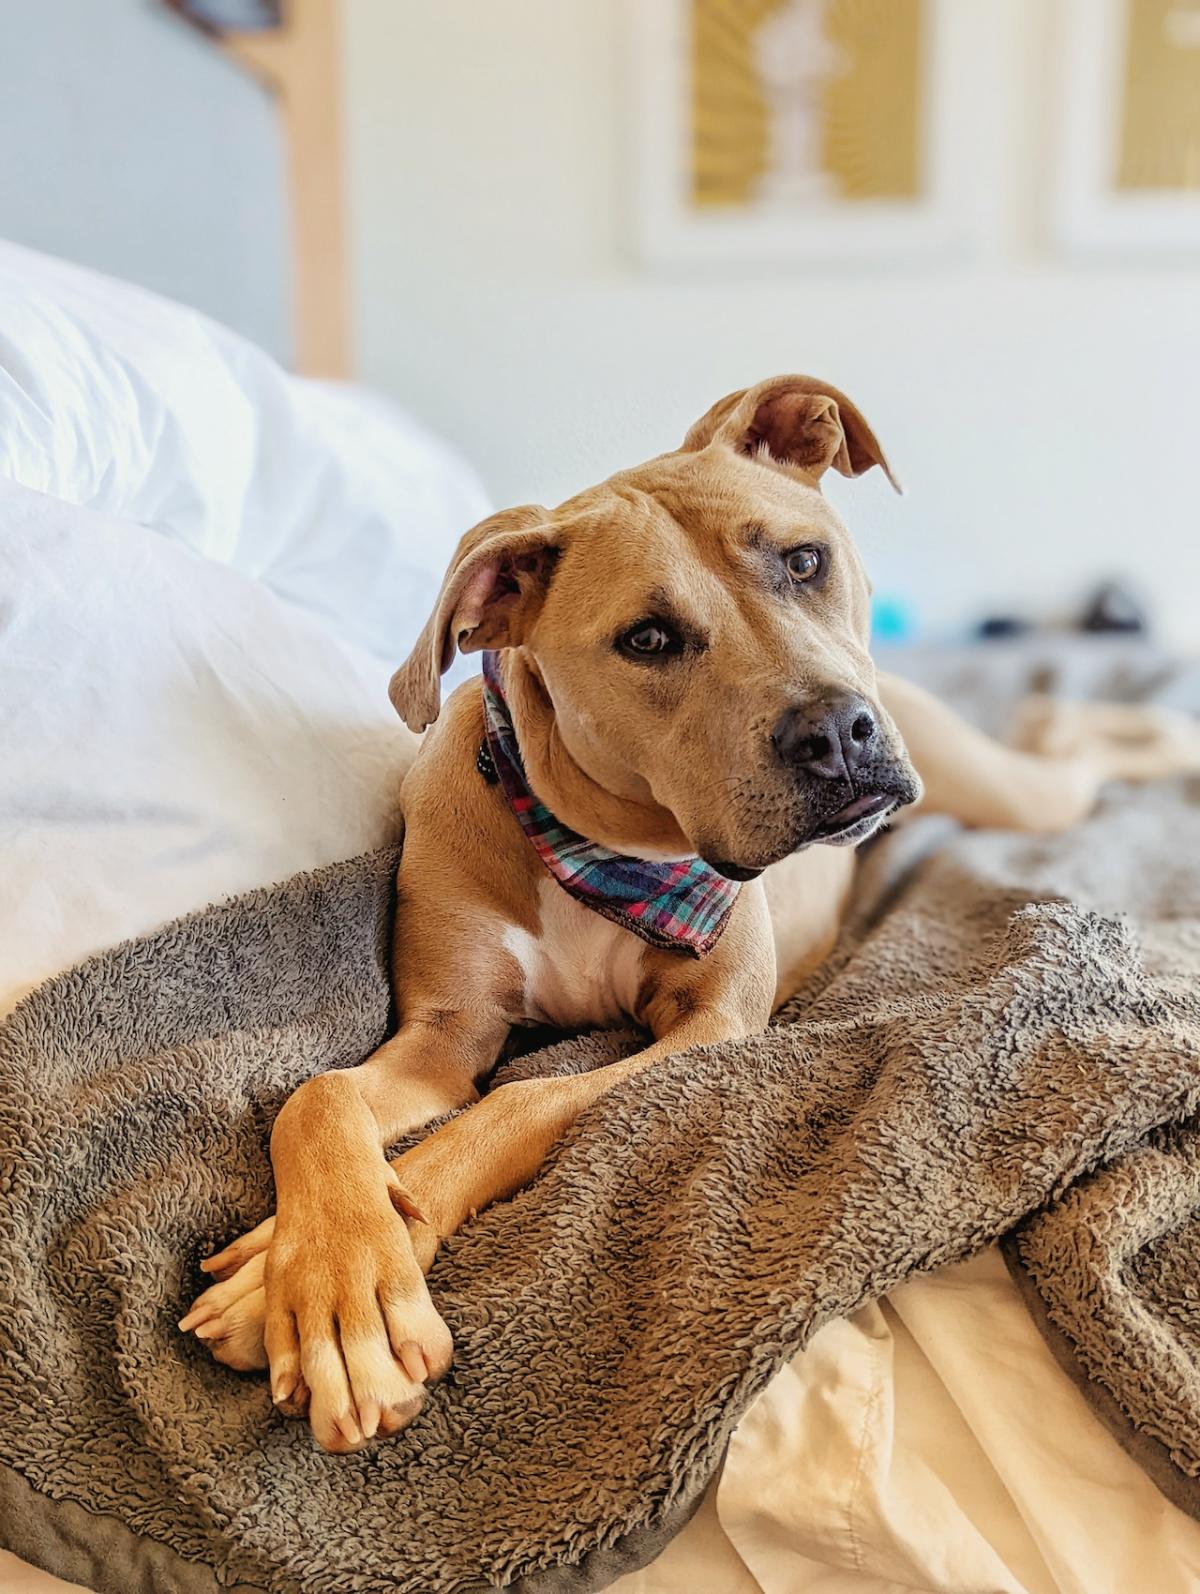 Phoebe has taught us plenty of things. She is a pit mix, which tends to carry a certain stigma, but if they only knew what a pushover she is! I’m amazed every day at just how much she loves people and other dogs. — Jason Pearce and dog, Phoebe